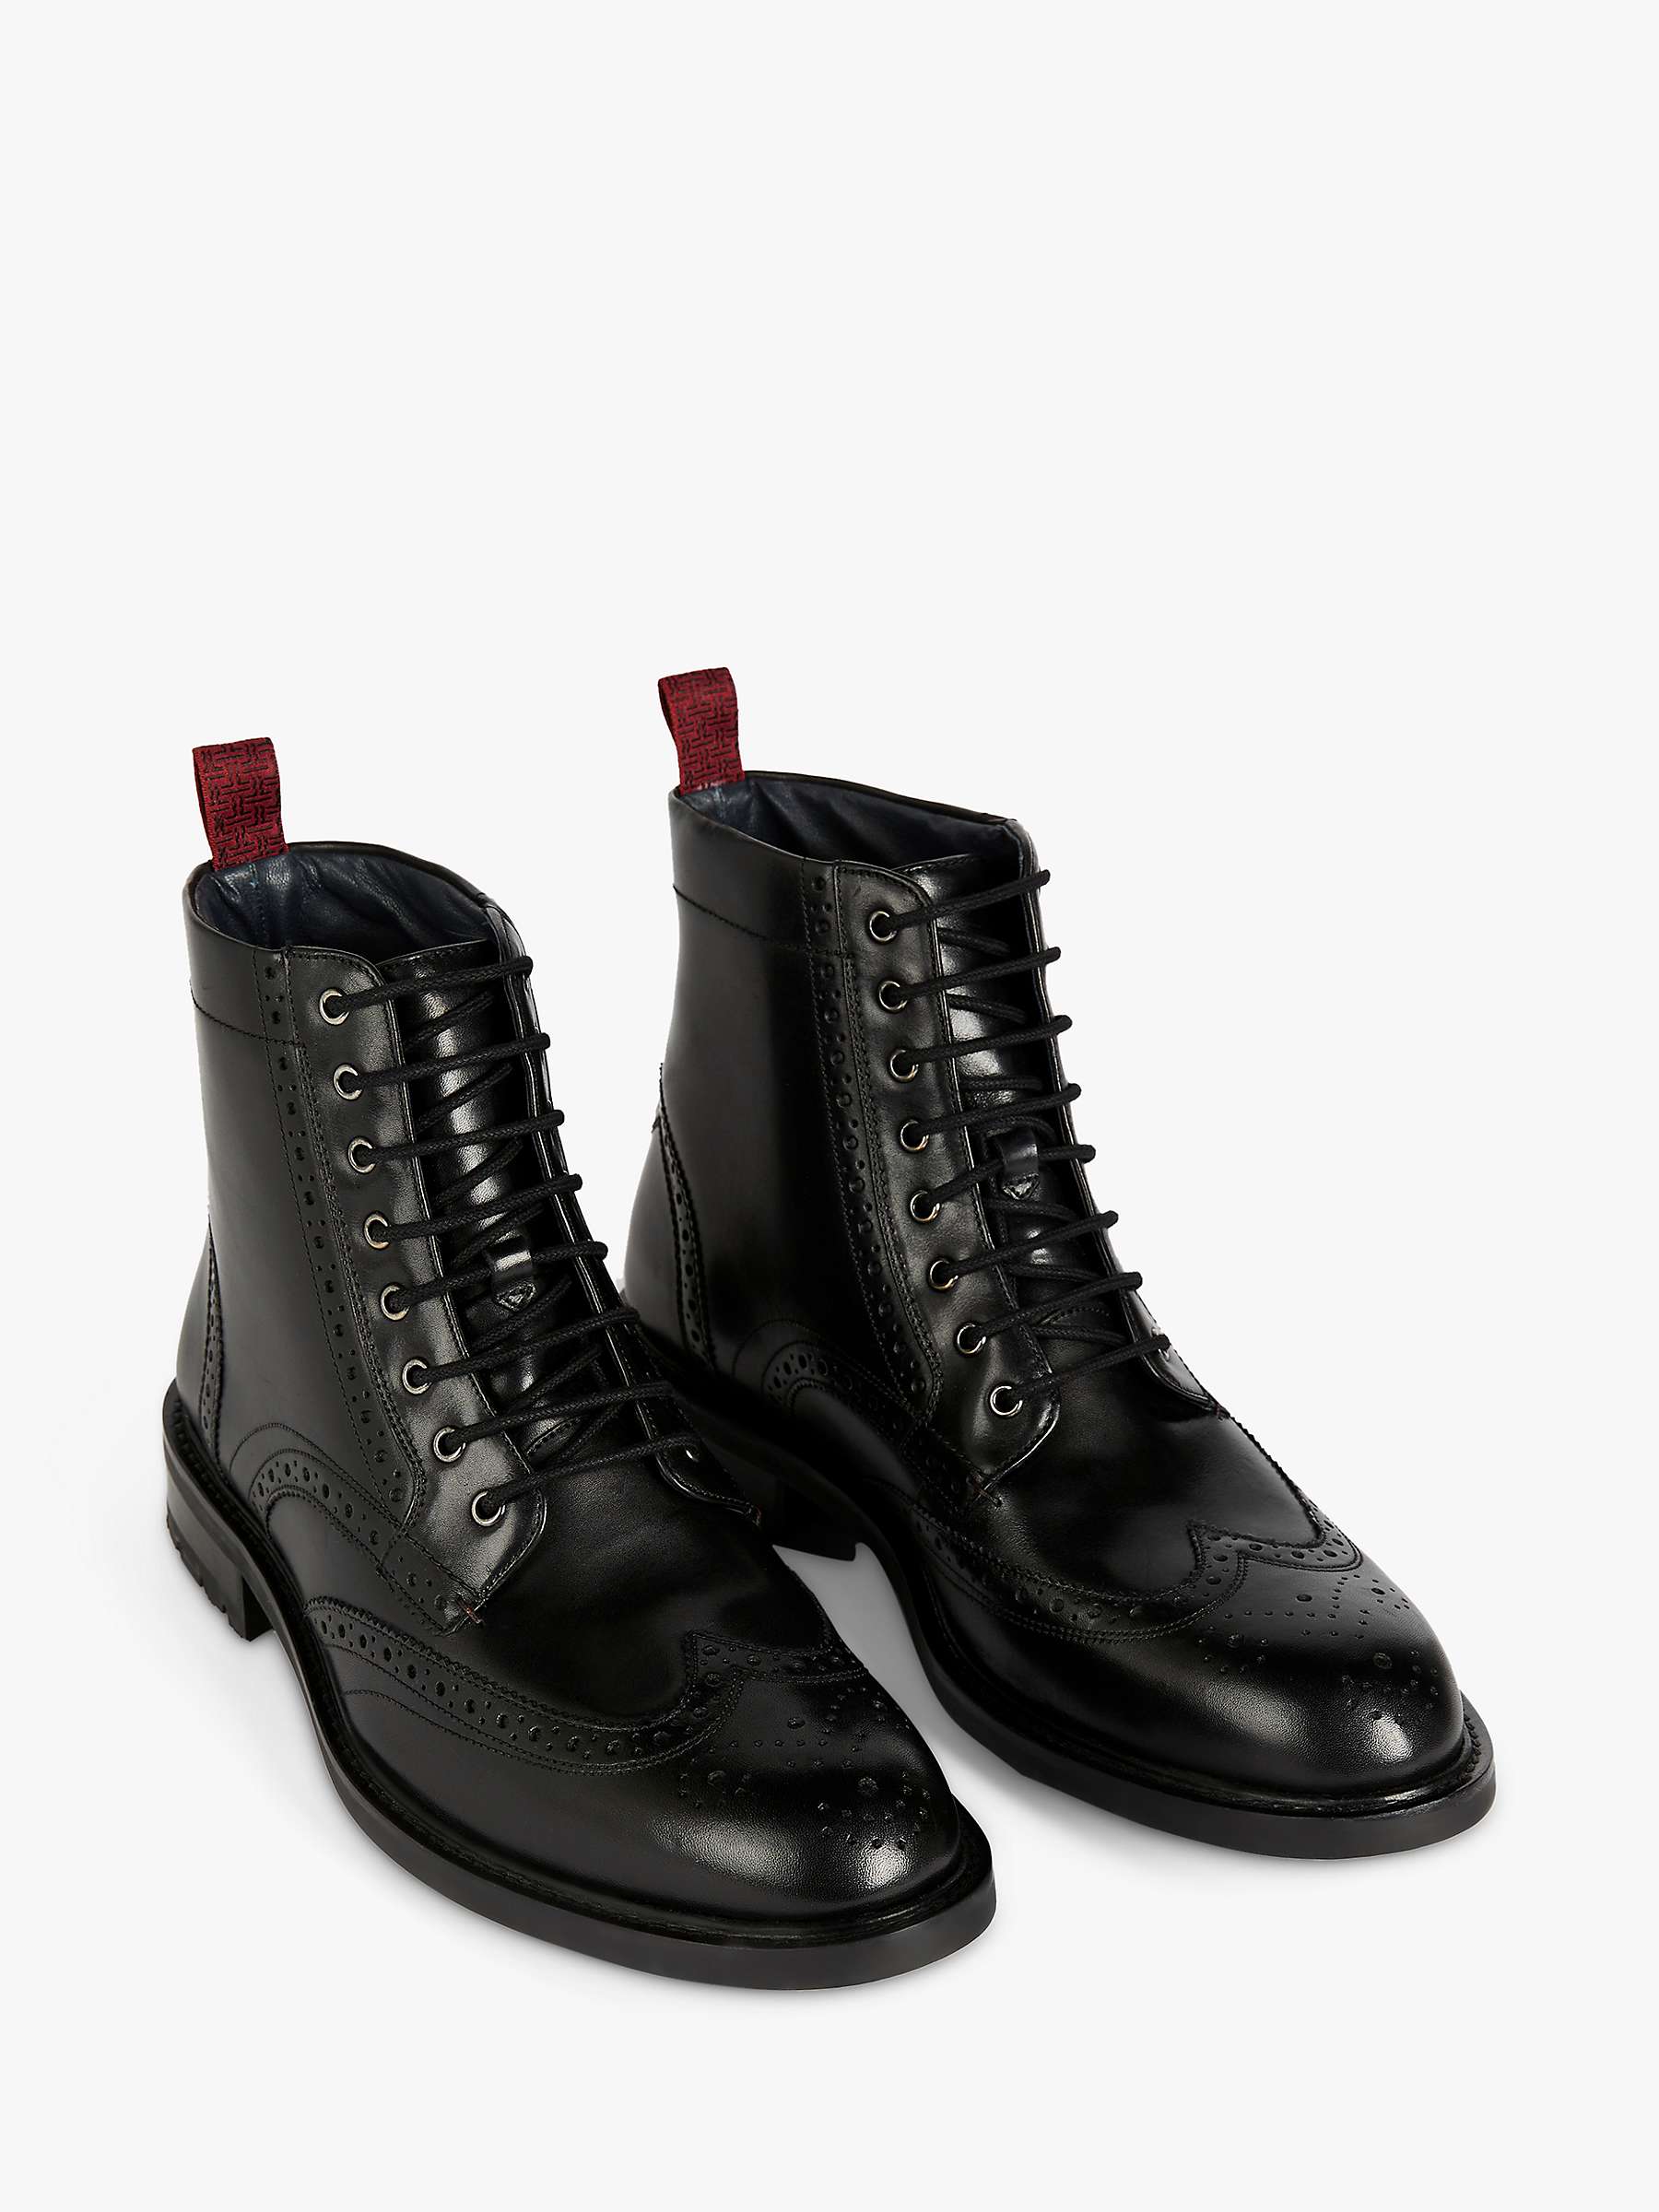 Buy Ted Baker Wadelan Leather Lace Up Boots Online at johnlewis.com